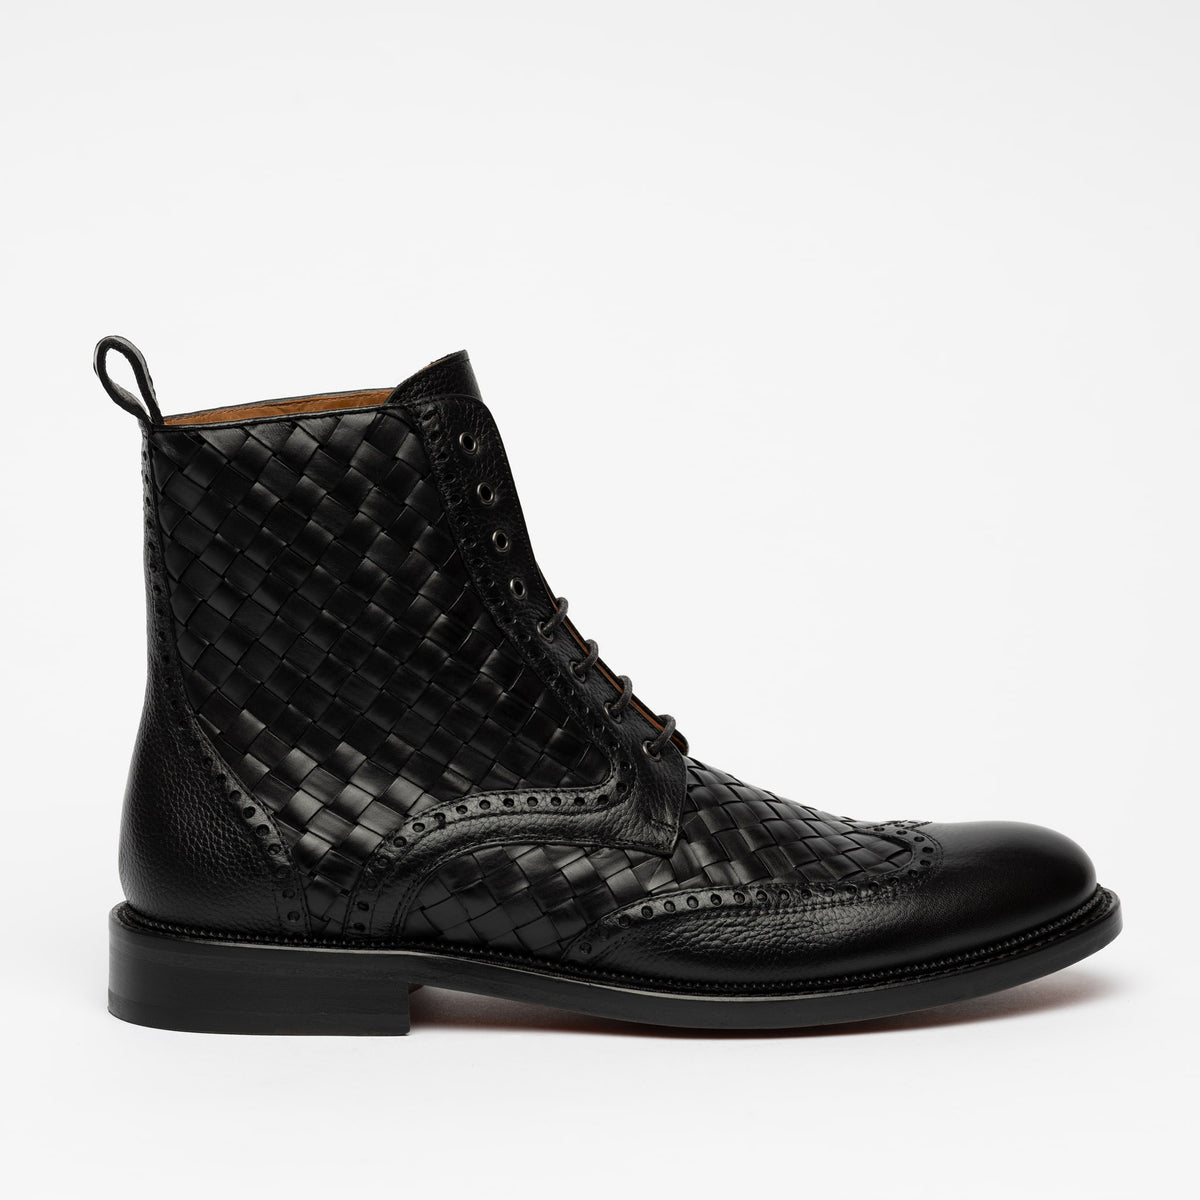 Saint Boot in Black side view